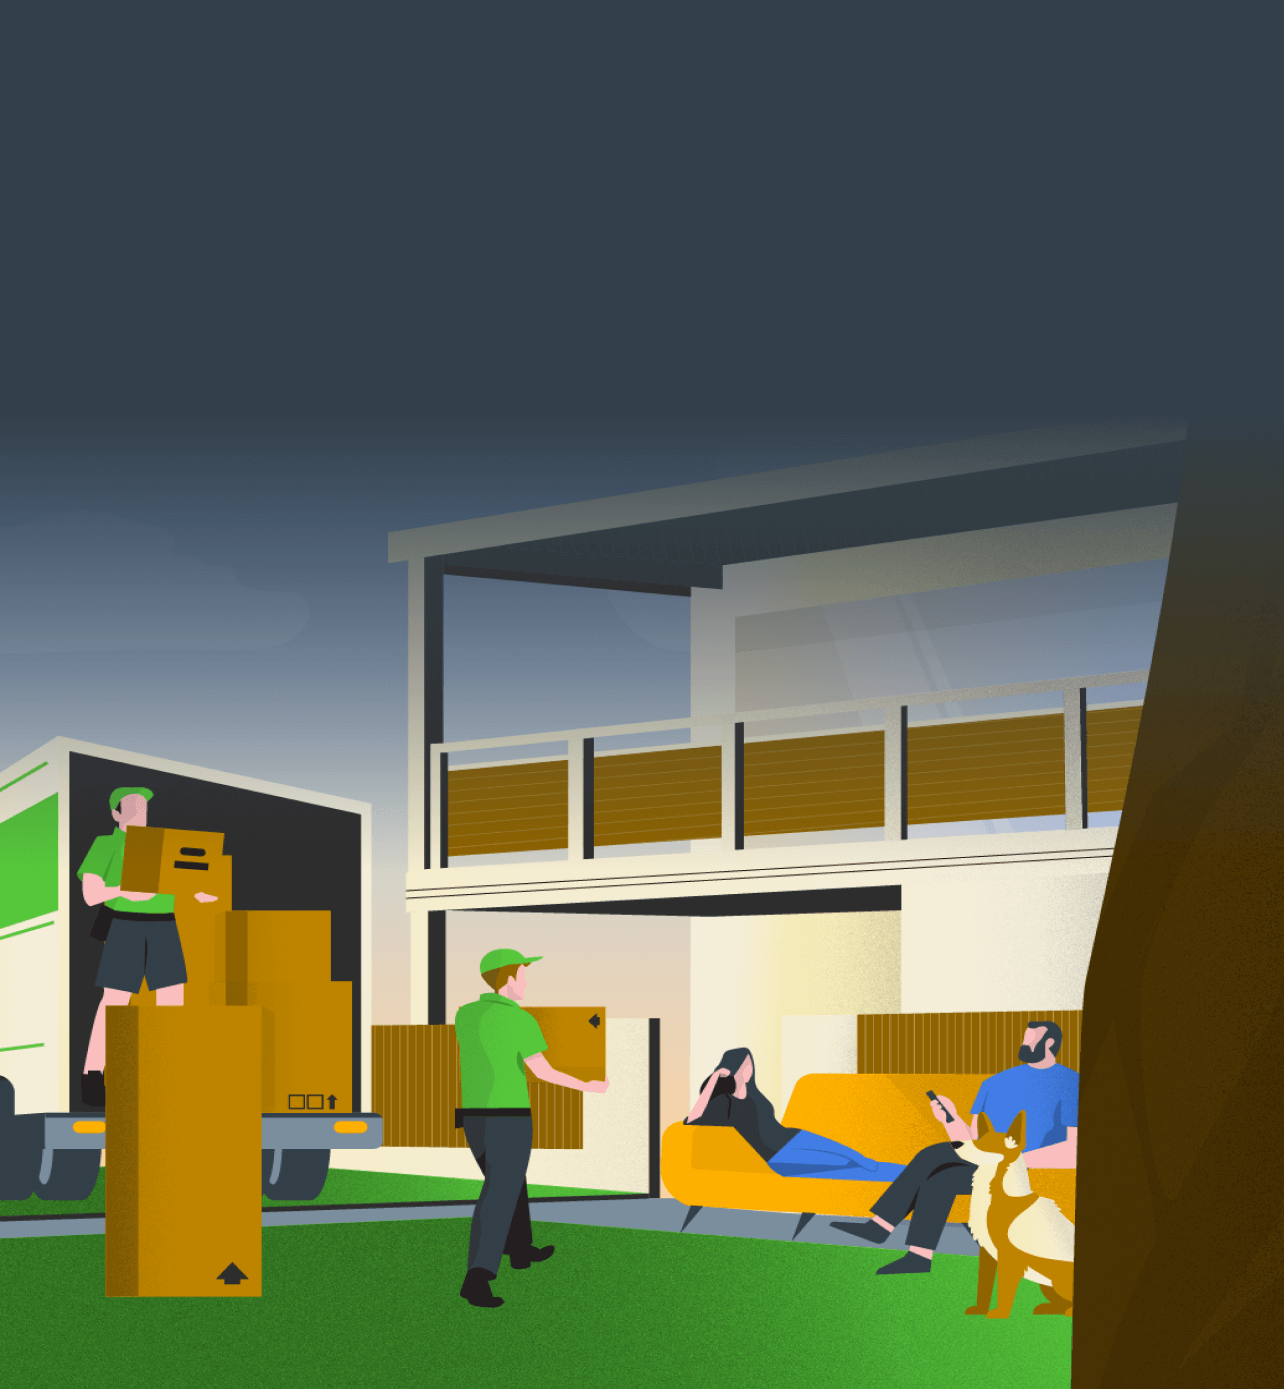 Illustration of movers unloading boxes into a home while homeowner lays on a couch.